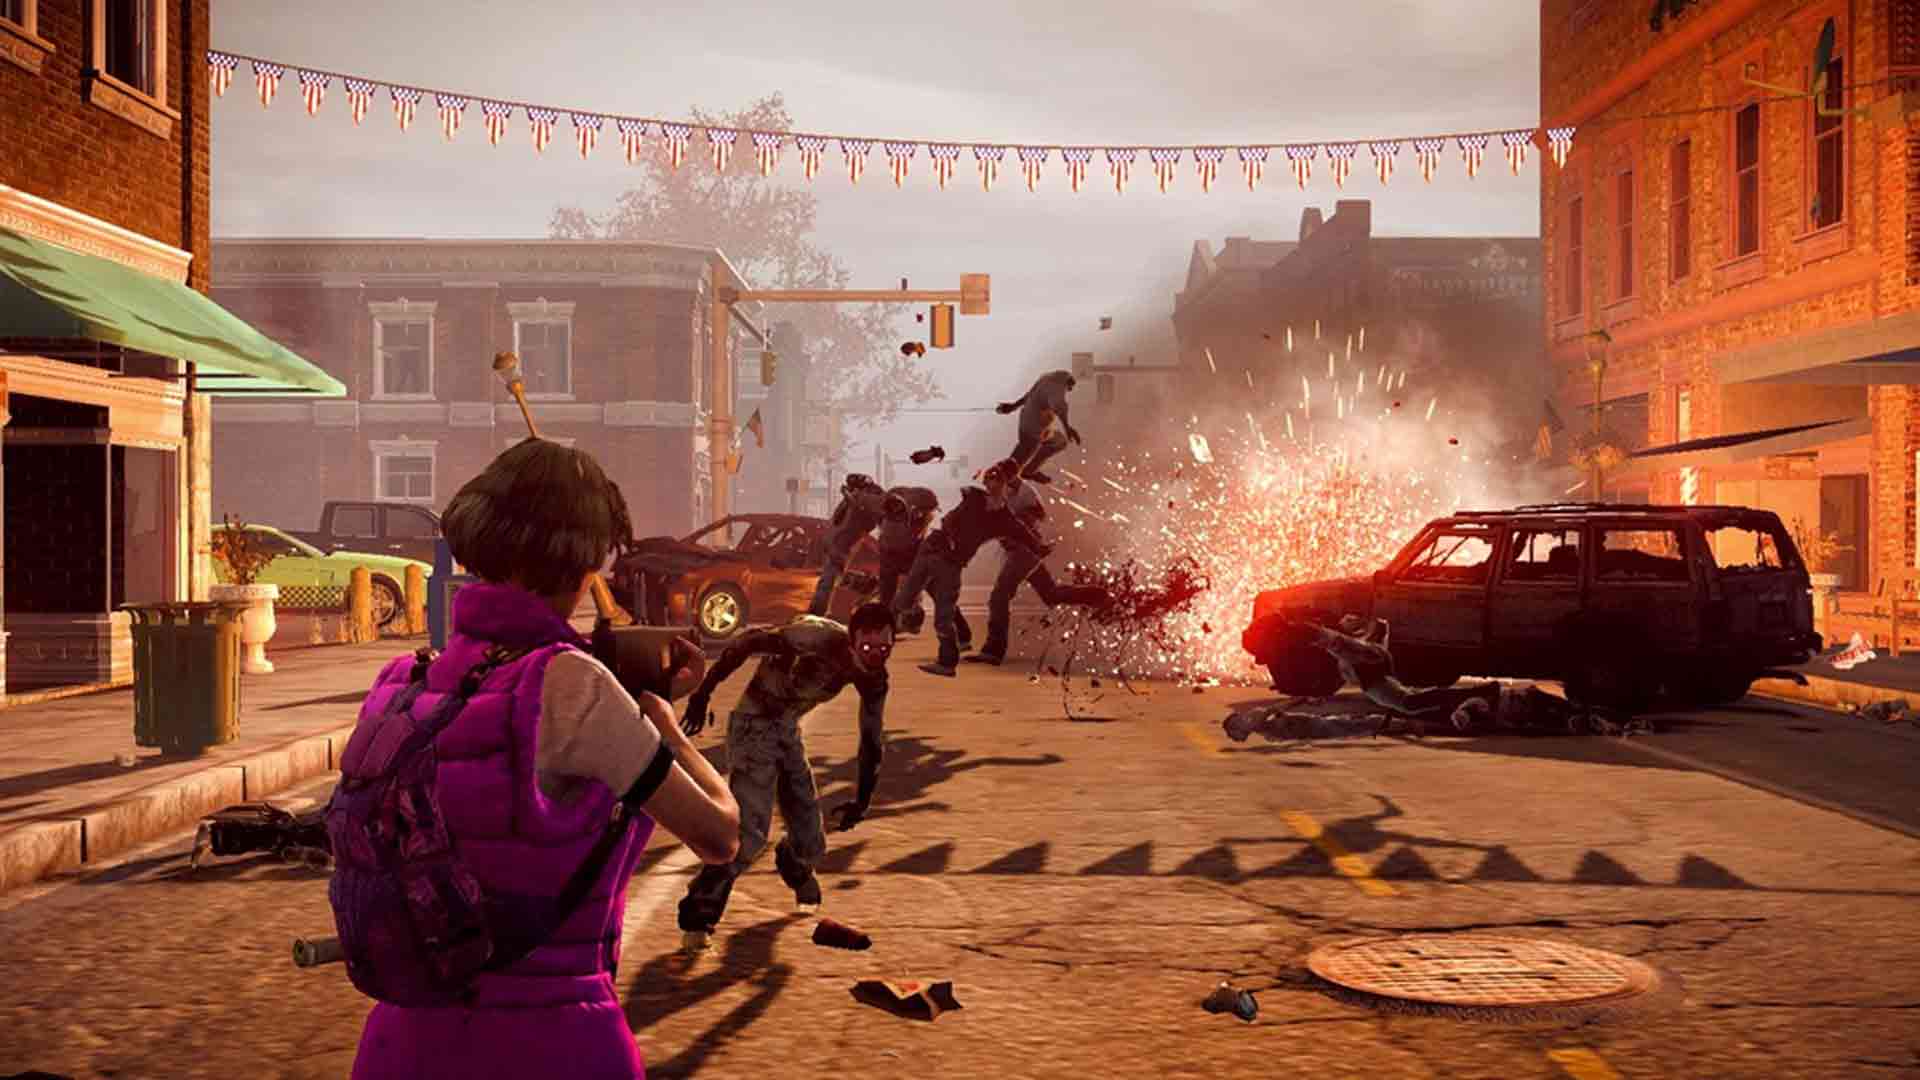 state of decay review